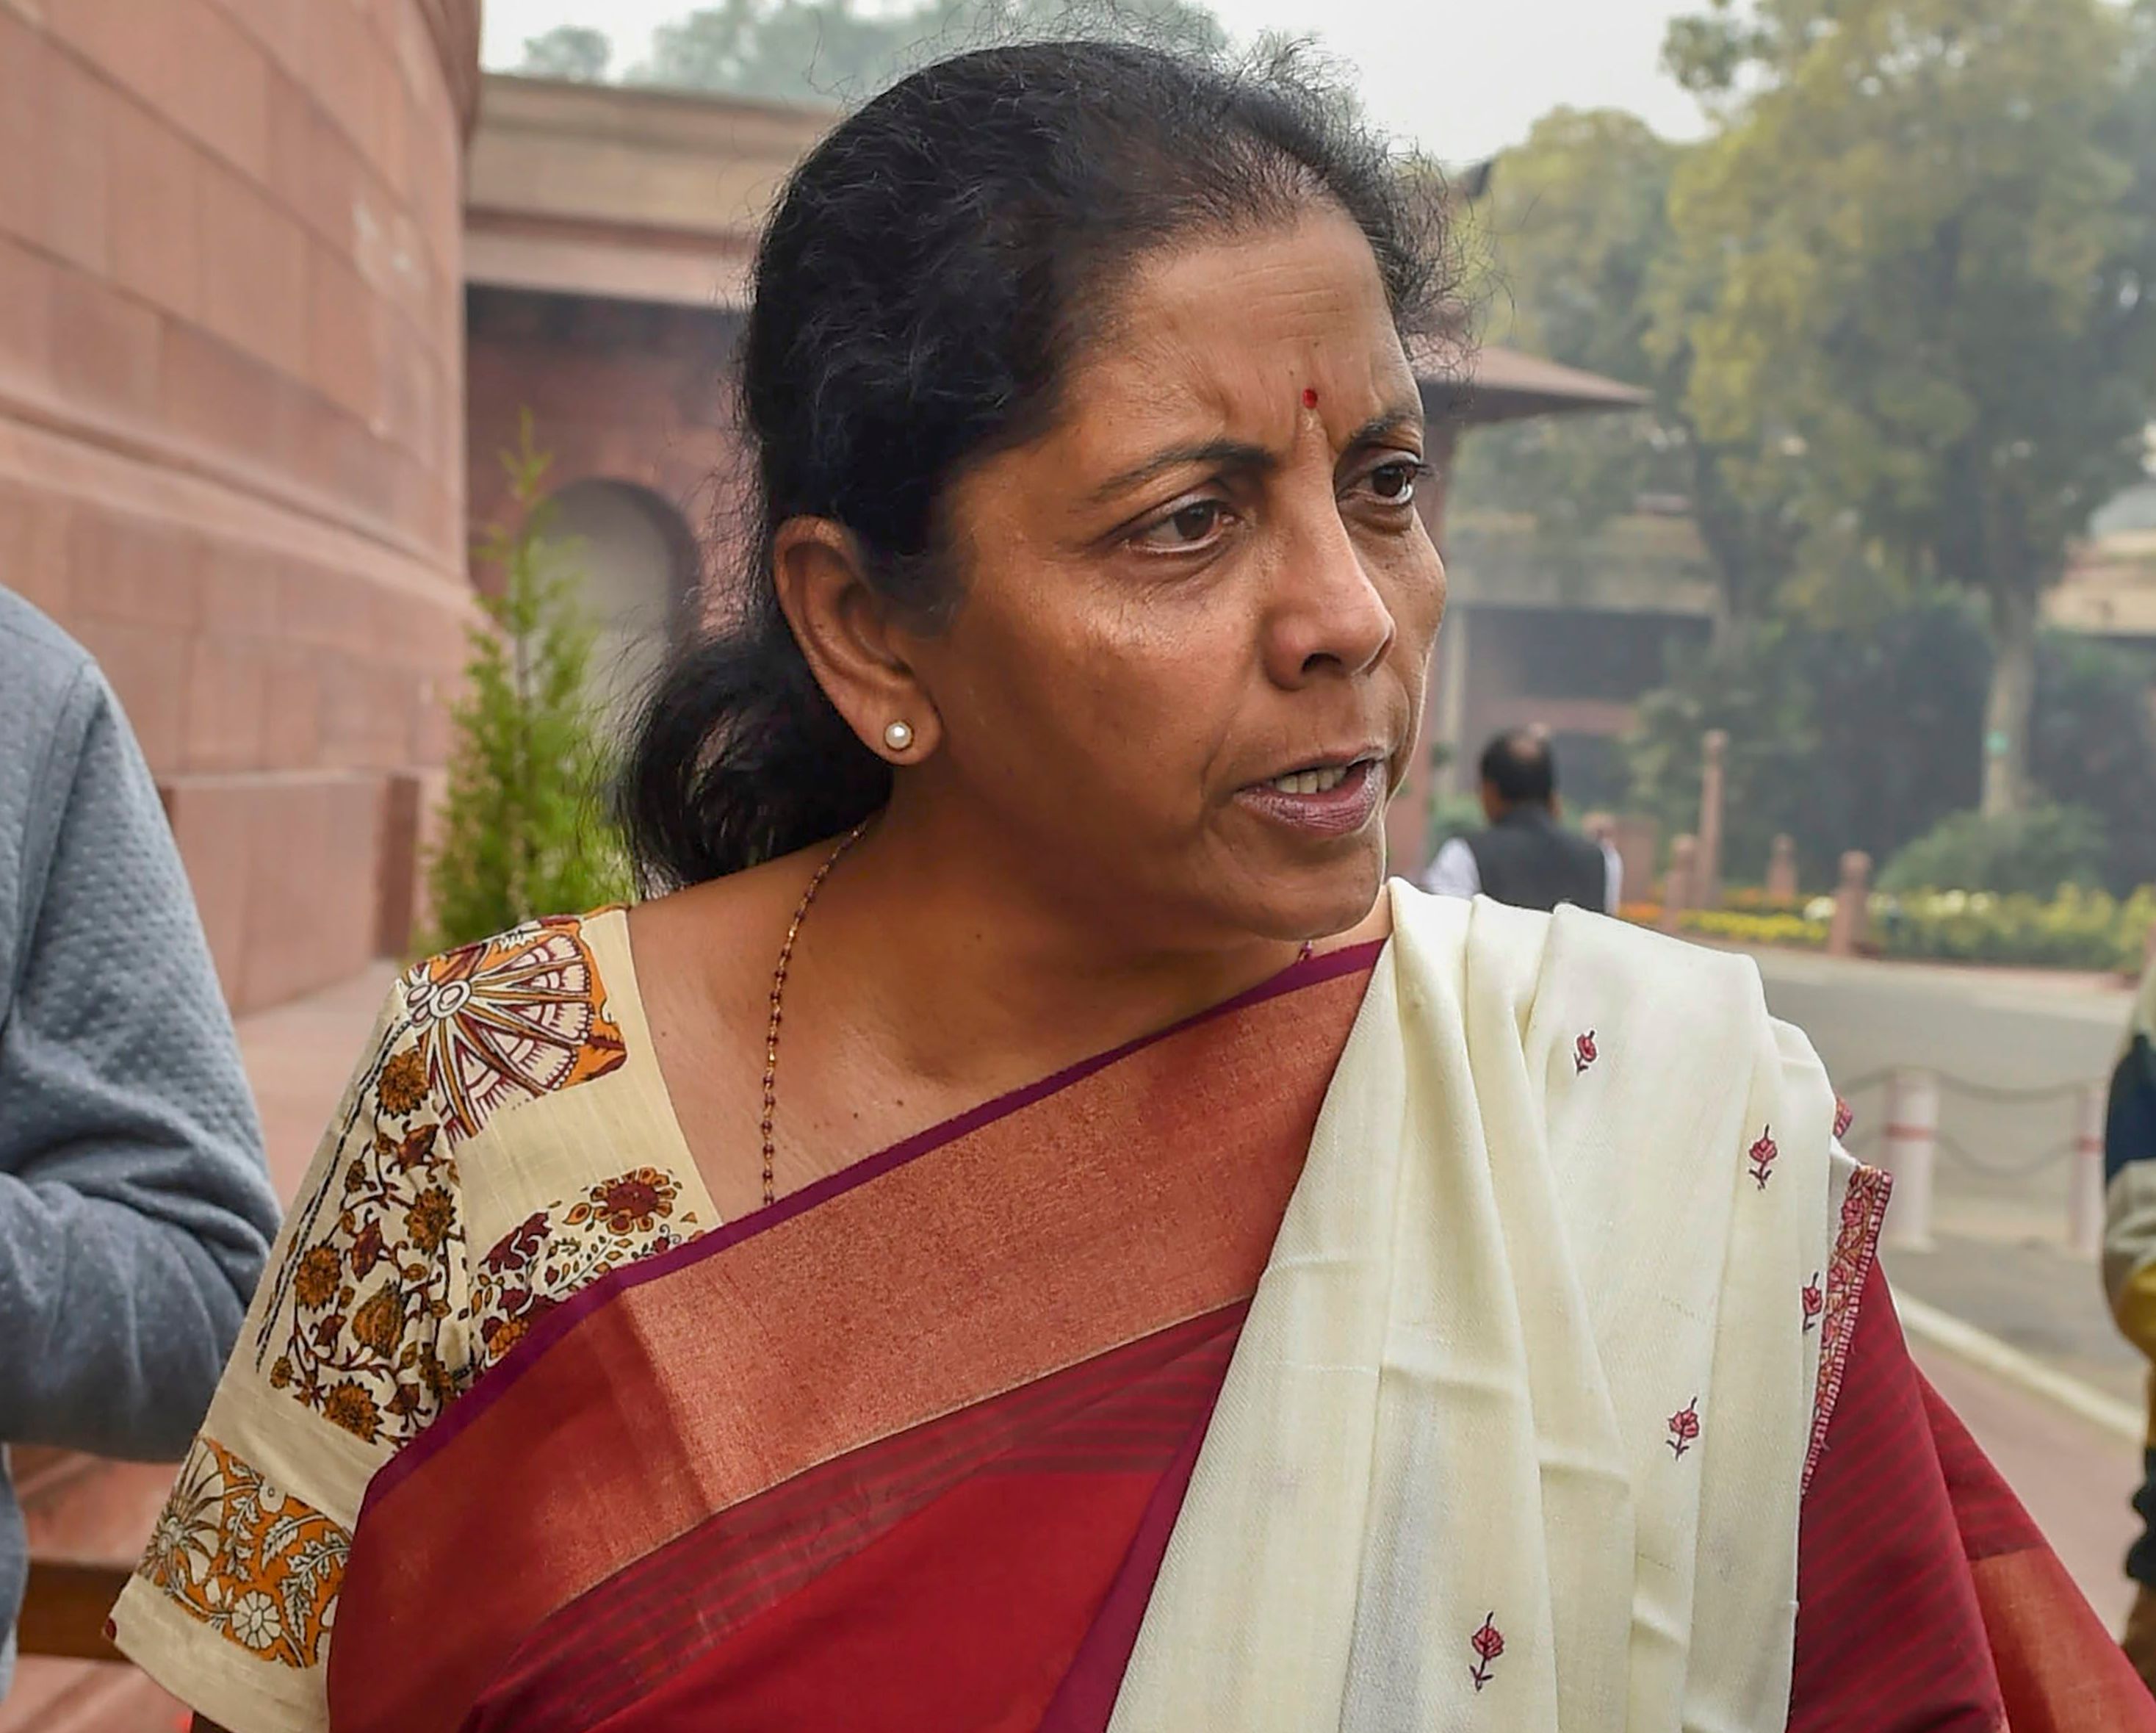 The finance minister, Nirmala Sitharaman, who made the shock announcement in her budget on July 5, insists that there have been extensive discussions before the government decided to push ahead with an idea that previous regimes had flirted with but never worked up the courage to take